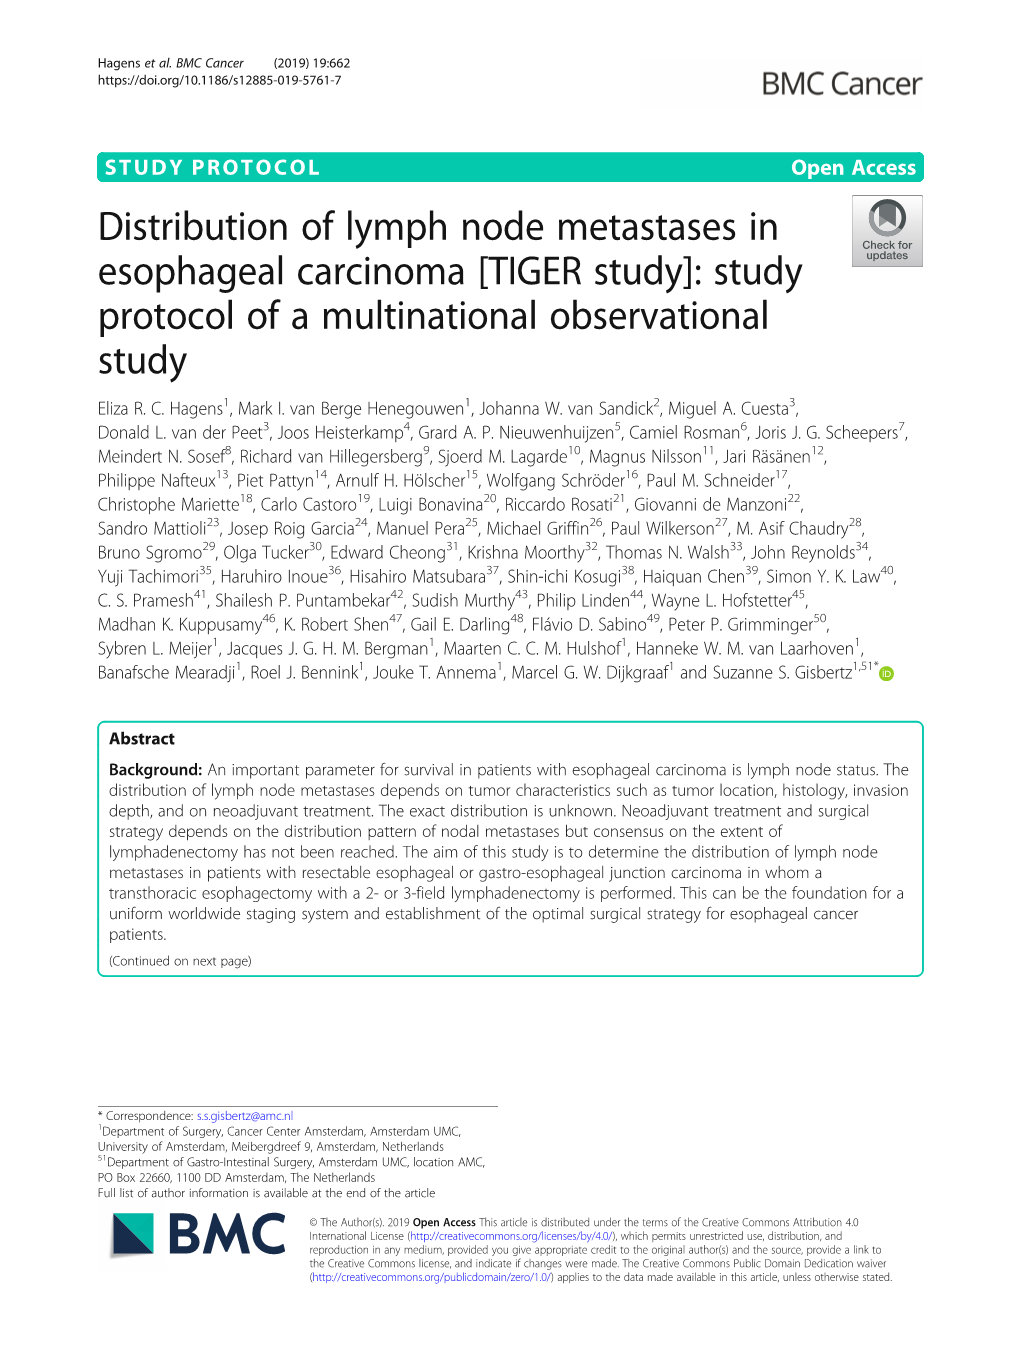 Distribution of Lymph Node Metastases in Esophageal Carcinoma [TIGER Study]: Study Protocol of a Multinational Observational Study Eliza R